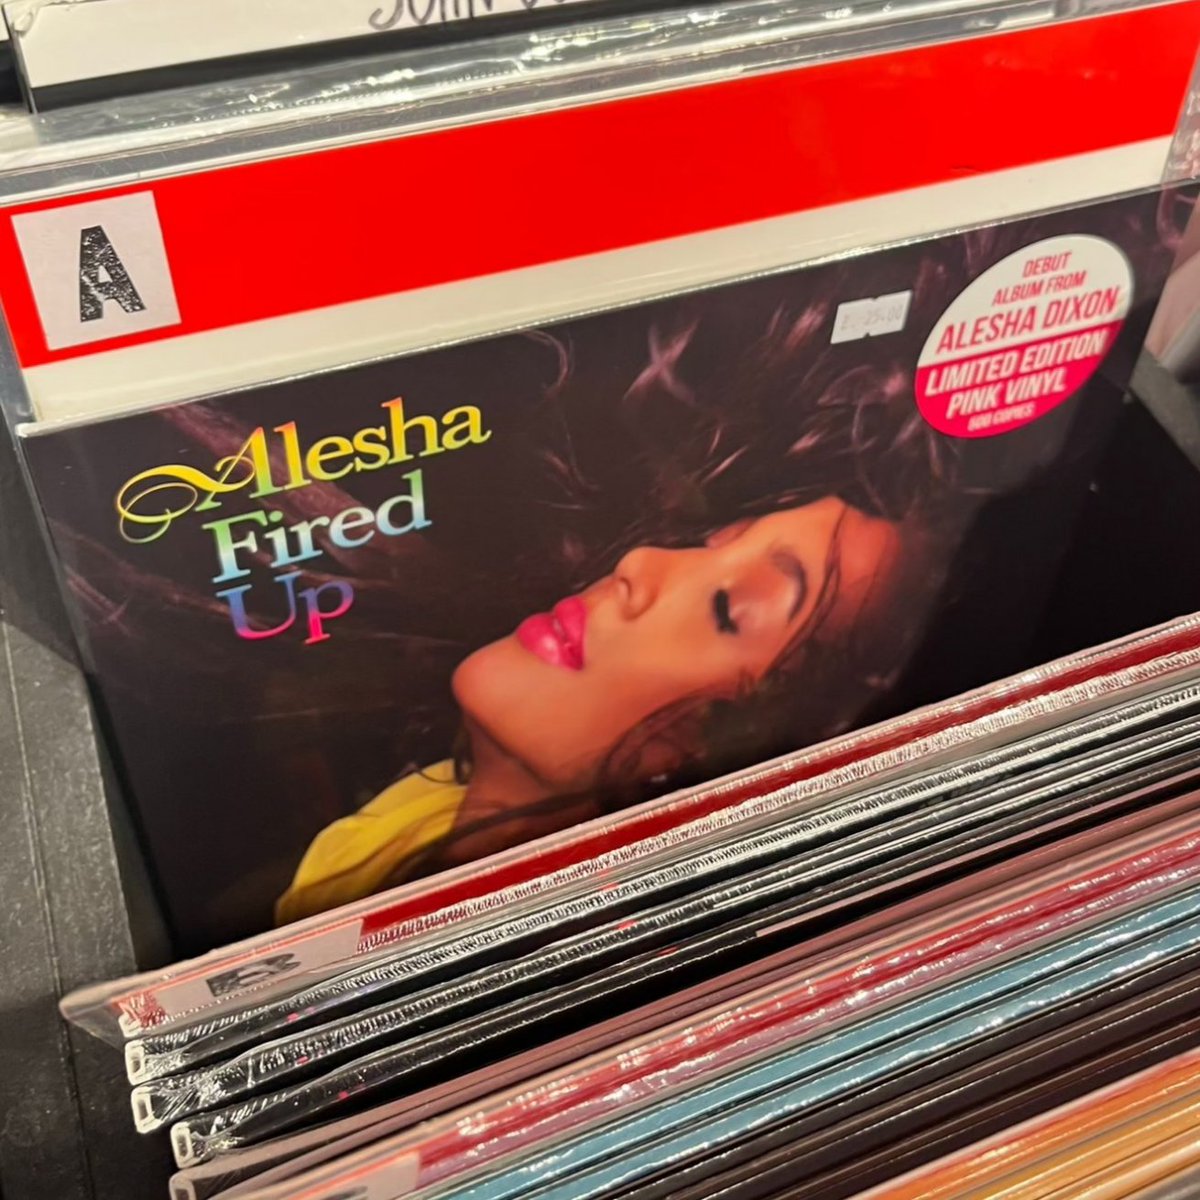 #RSDBF 💽 @aleshaofficial's iconic debut album Fired Up is out on vinyl for the first time! 🔥⬆️ This strictly limited 'lipstick pink' LP is available in independent record stores across the UK, as part of Record Store Day Black Friday. Grab your copy: slinky.to/firedup